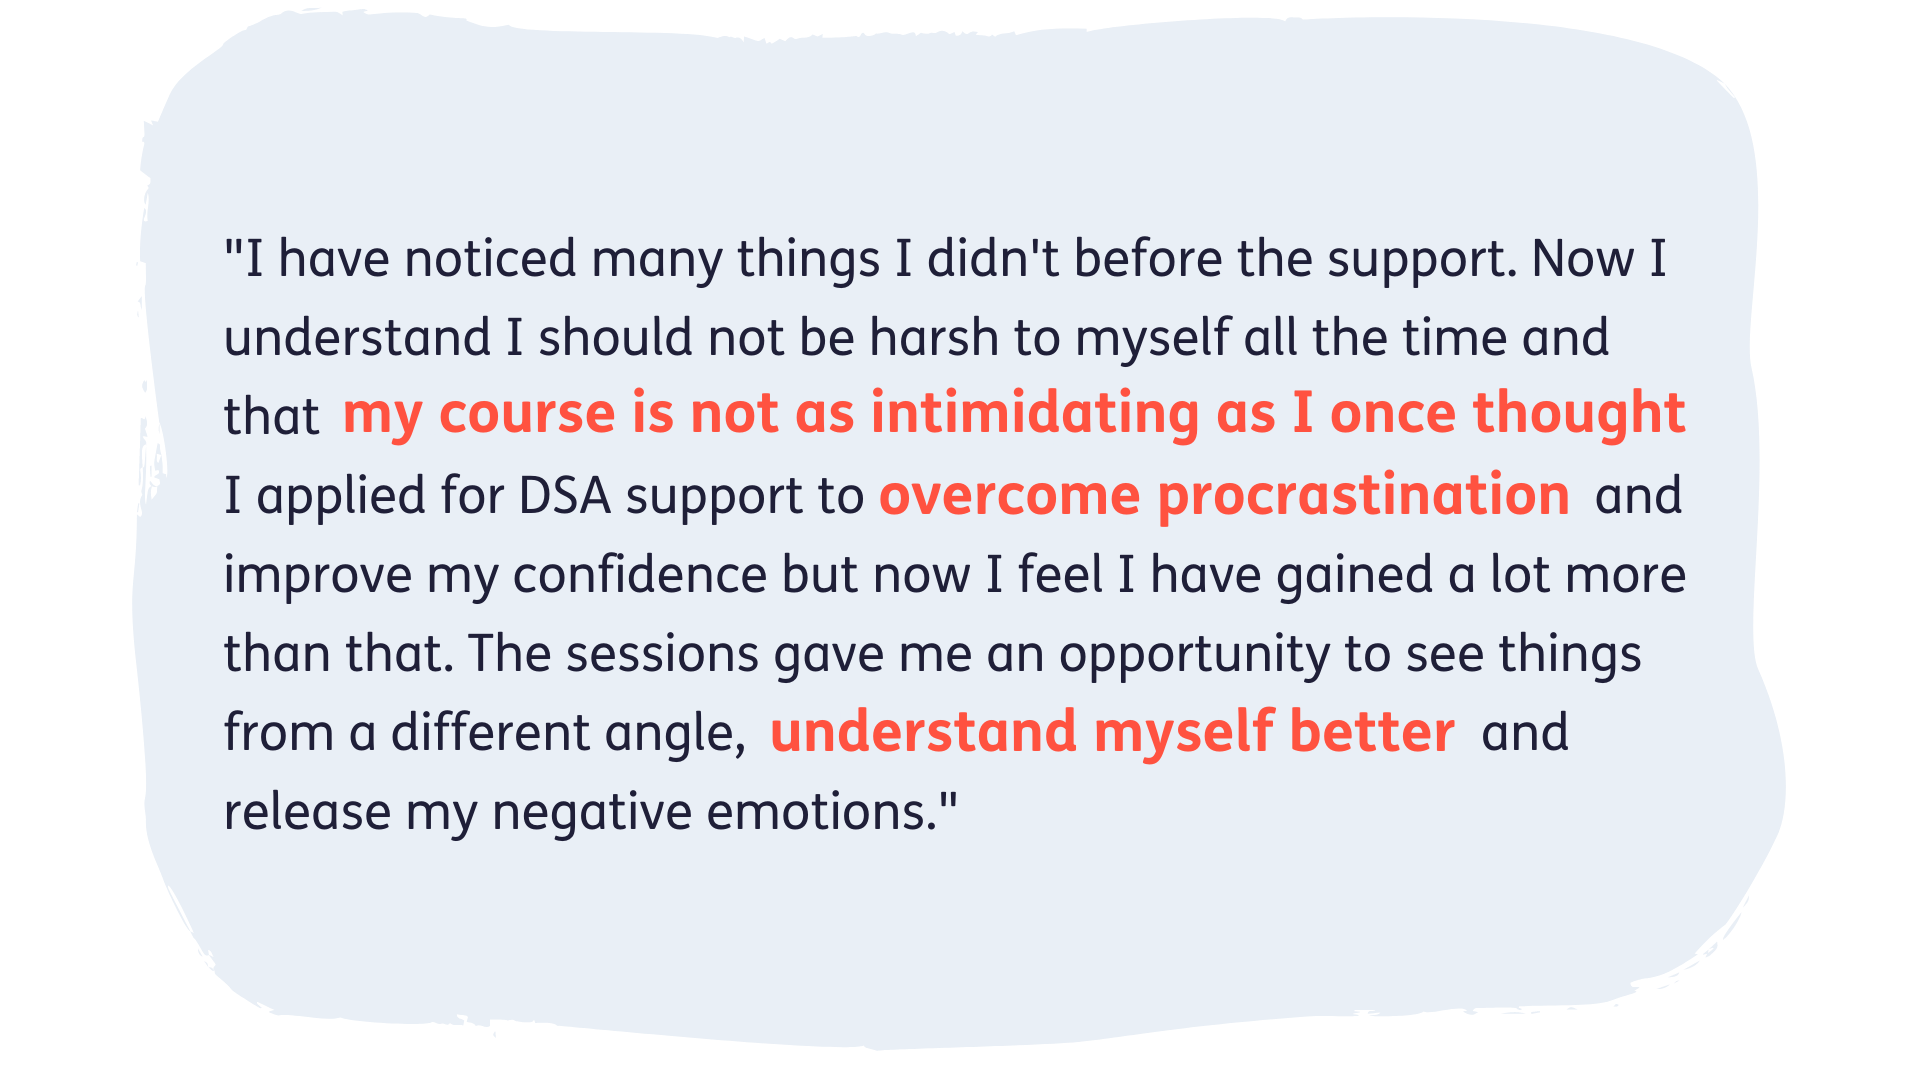 "I have noticed many things I didn't before the support. Now I understand I should not be harsh to myself all the time and that my course is not as intimidating as I once thought. I applied for DSA support to overcome procrastination and improve my confidence but now I feel I have gained a lot more than that. The sessions gave me an opportunity to see things from a different angle, understand myself better and release my negative emotions."